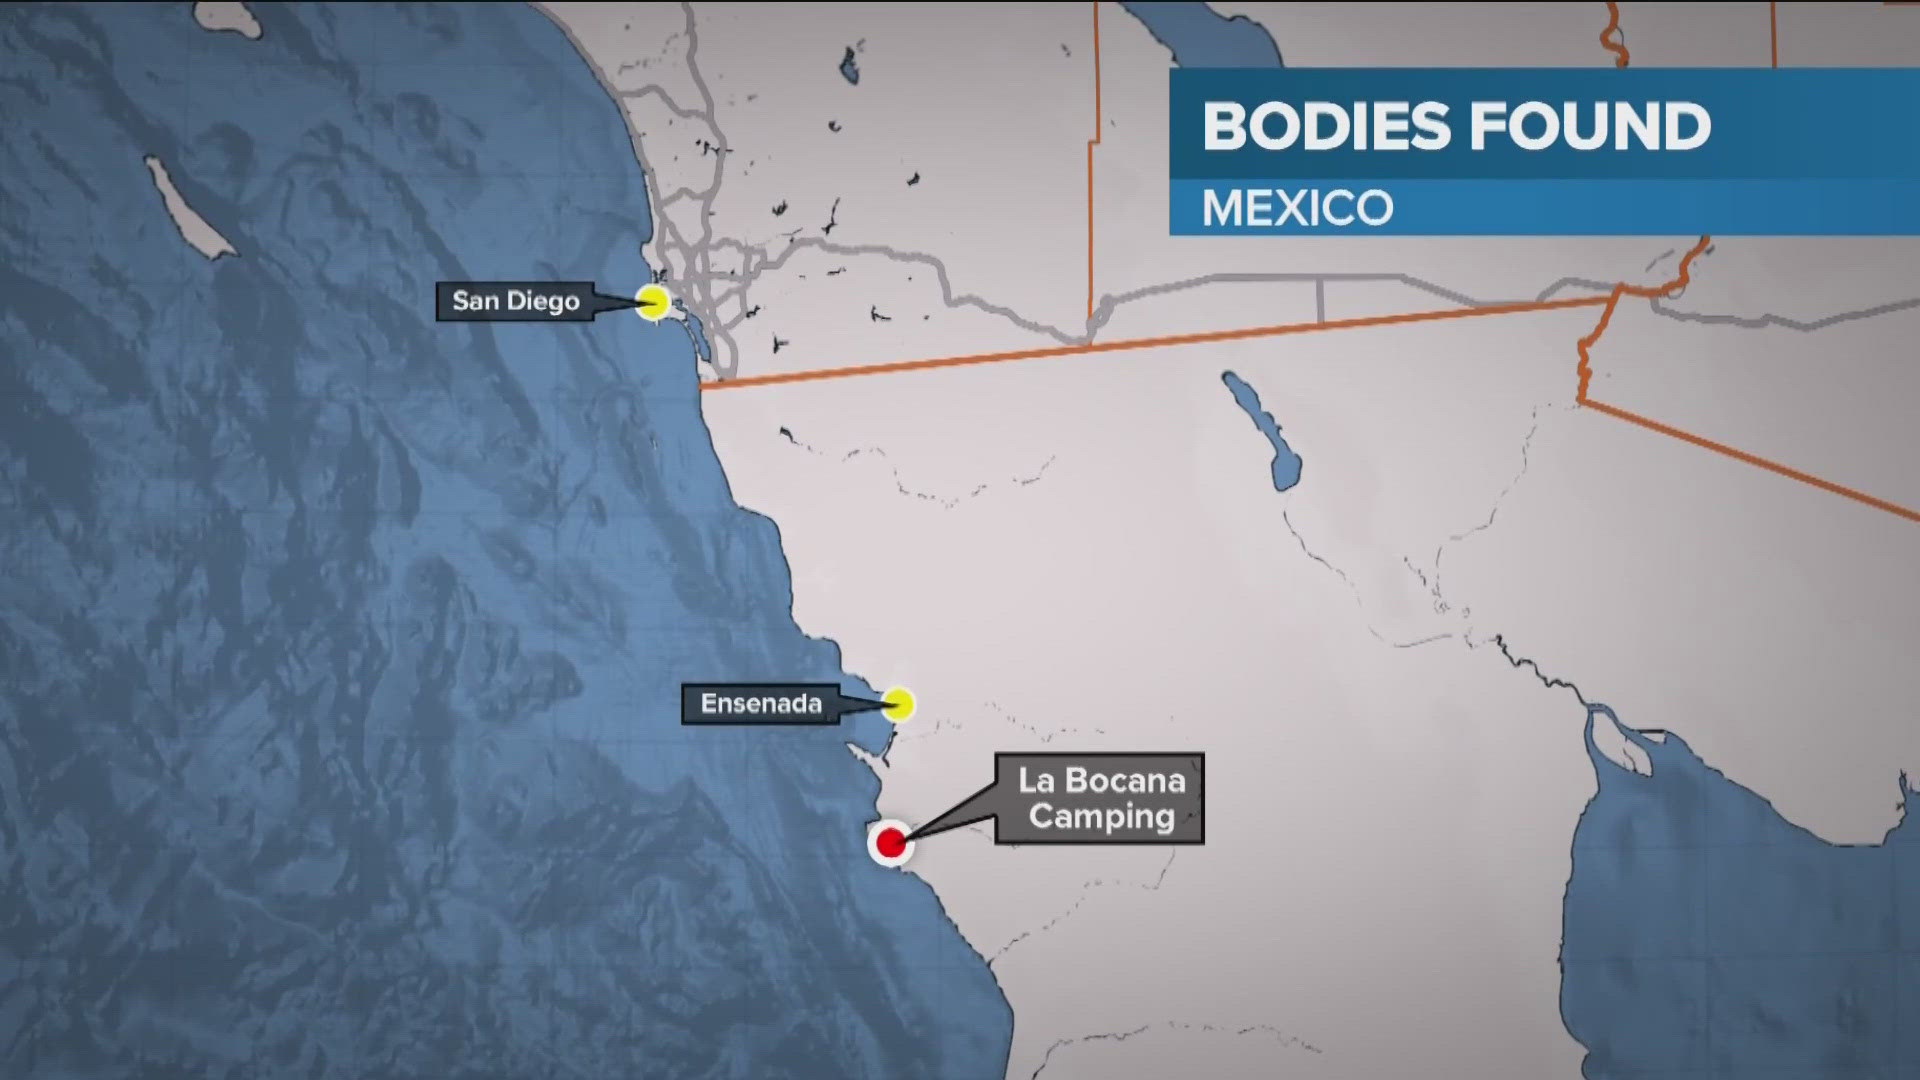 Thieves apparently killed the three, who were on a surfing trip to Mexico’s Baja peninsula, to steal their truck because they wanted the tires.